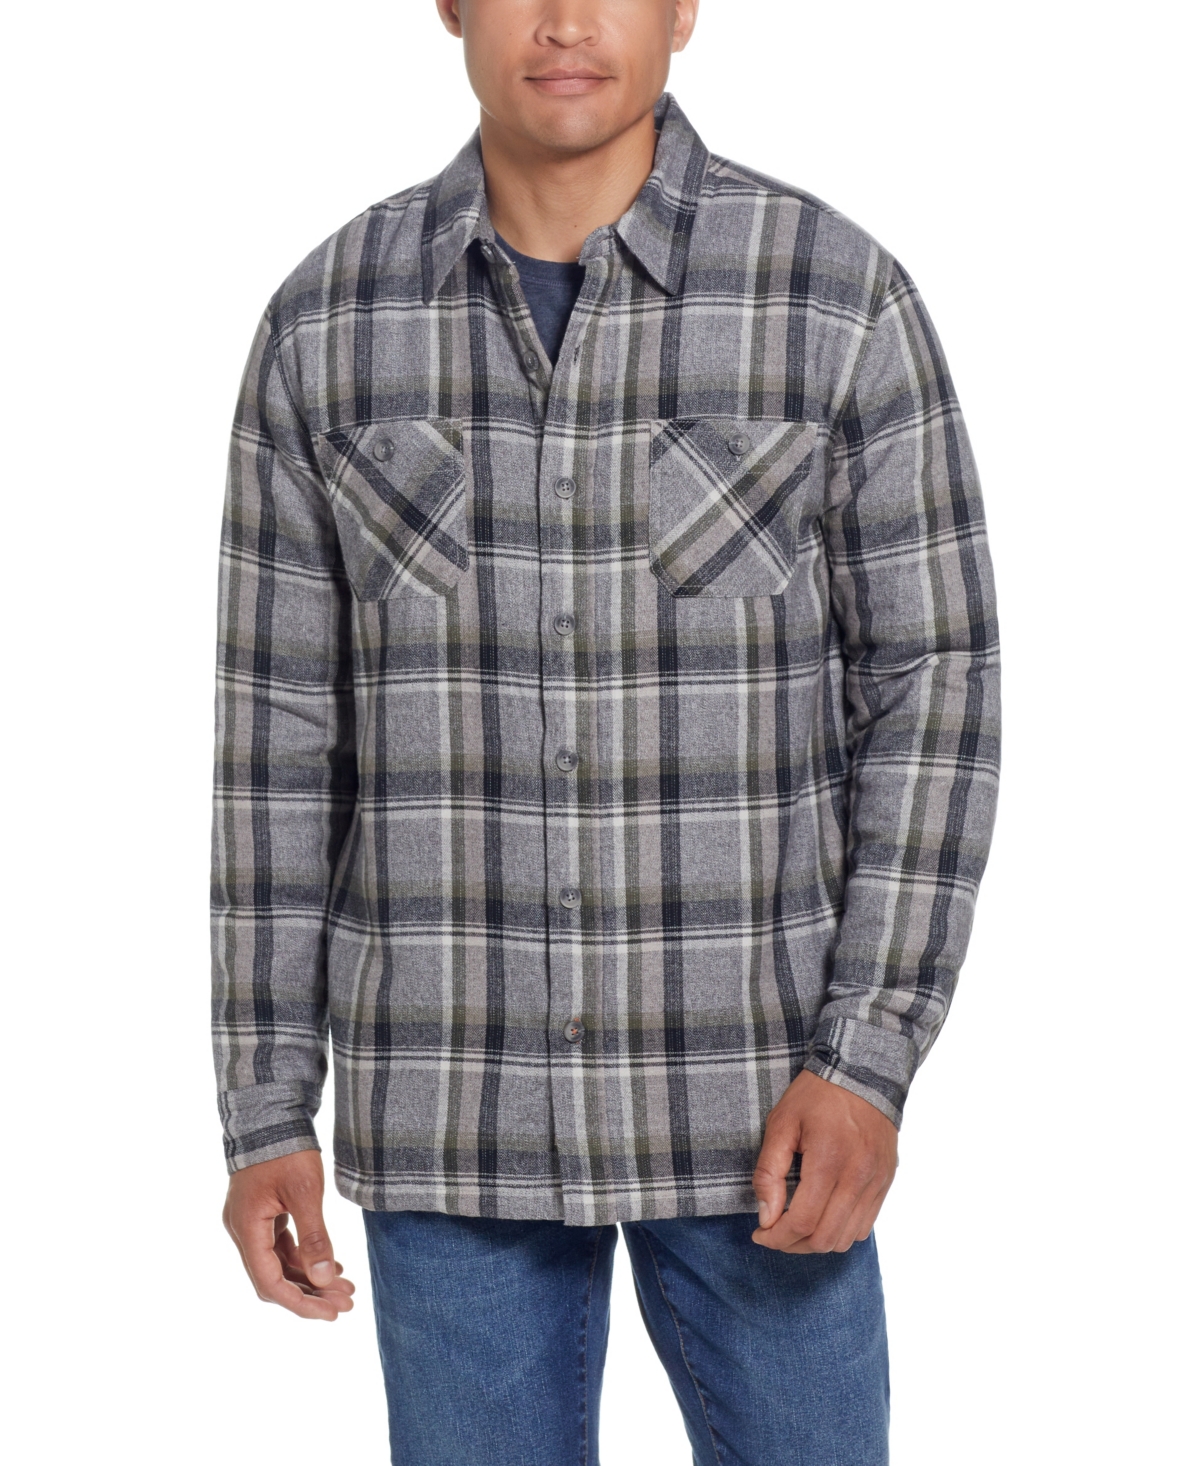 Men's Sherpa Lined Flannel Shirt Jacket - Red Dahlia